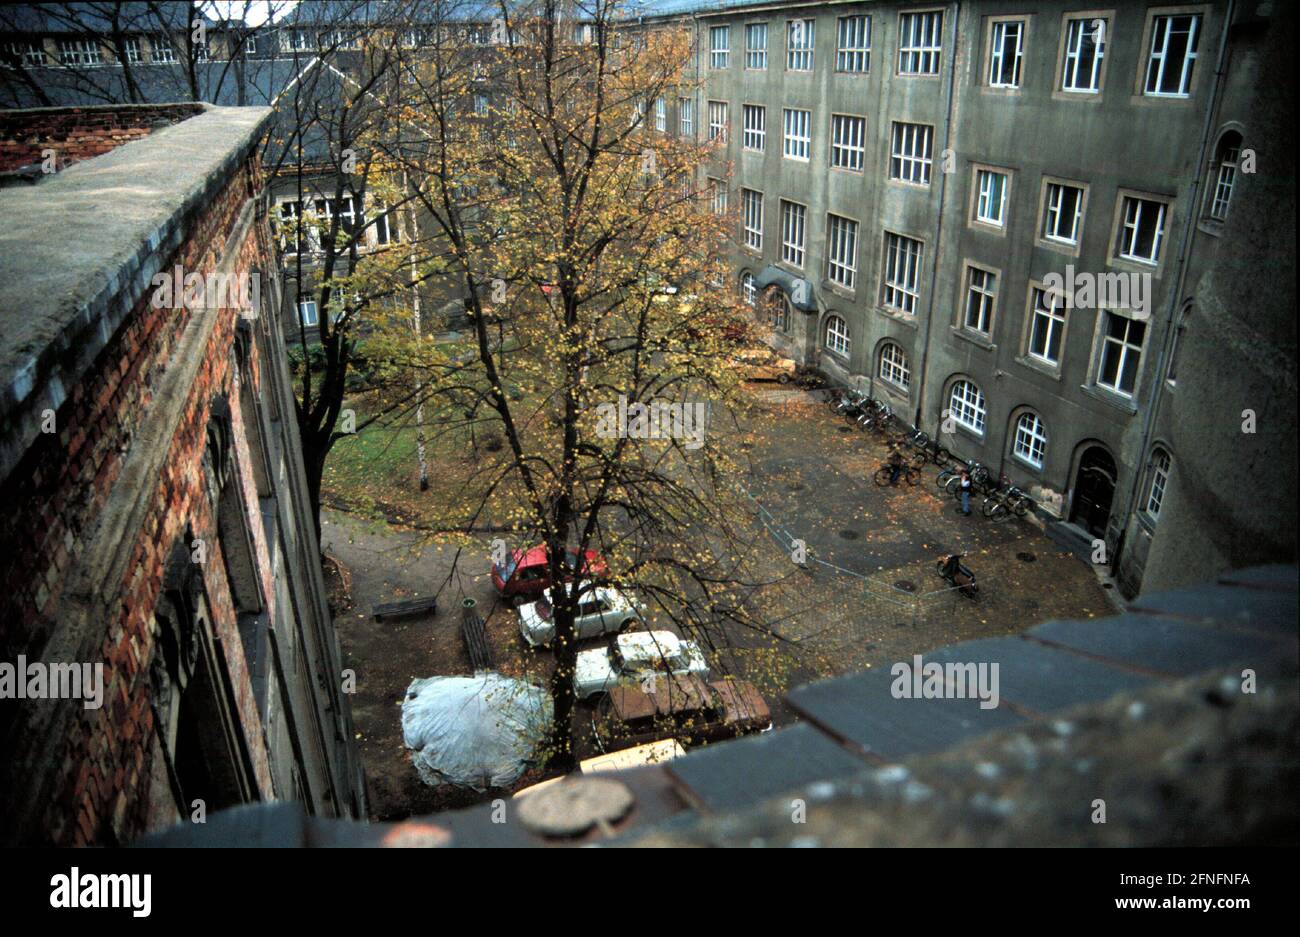 Dresden, DEU, 19.11.1991, Kunsthochschule Dresden, courtyard of the  Kunsthochschule, on the left the ruins of the part destroyed in the Second  World War, training in painting, sculpture, restoration, and mask making,  [automated